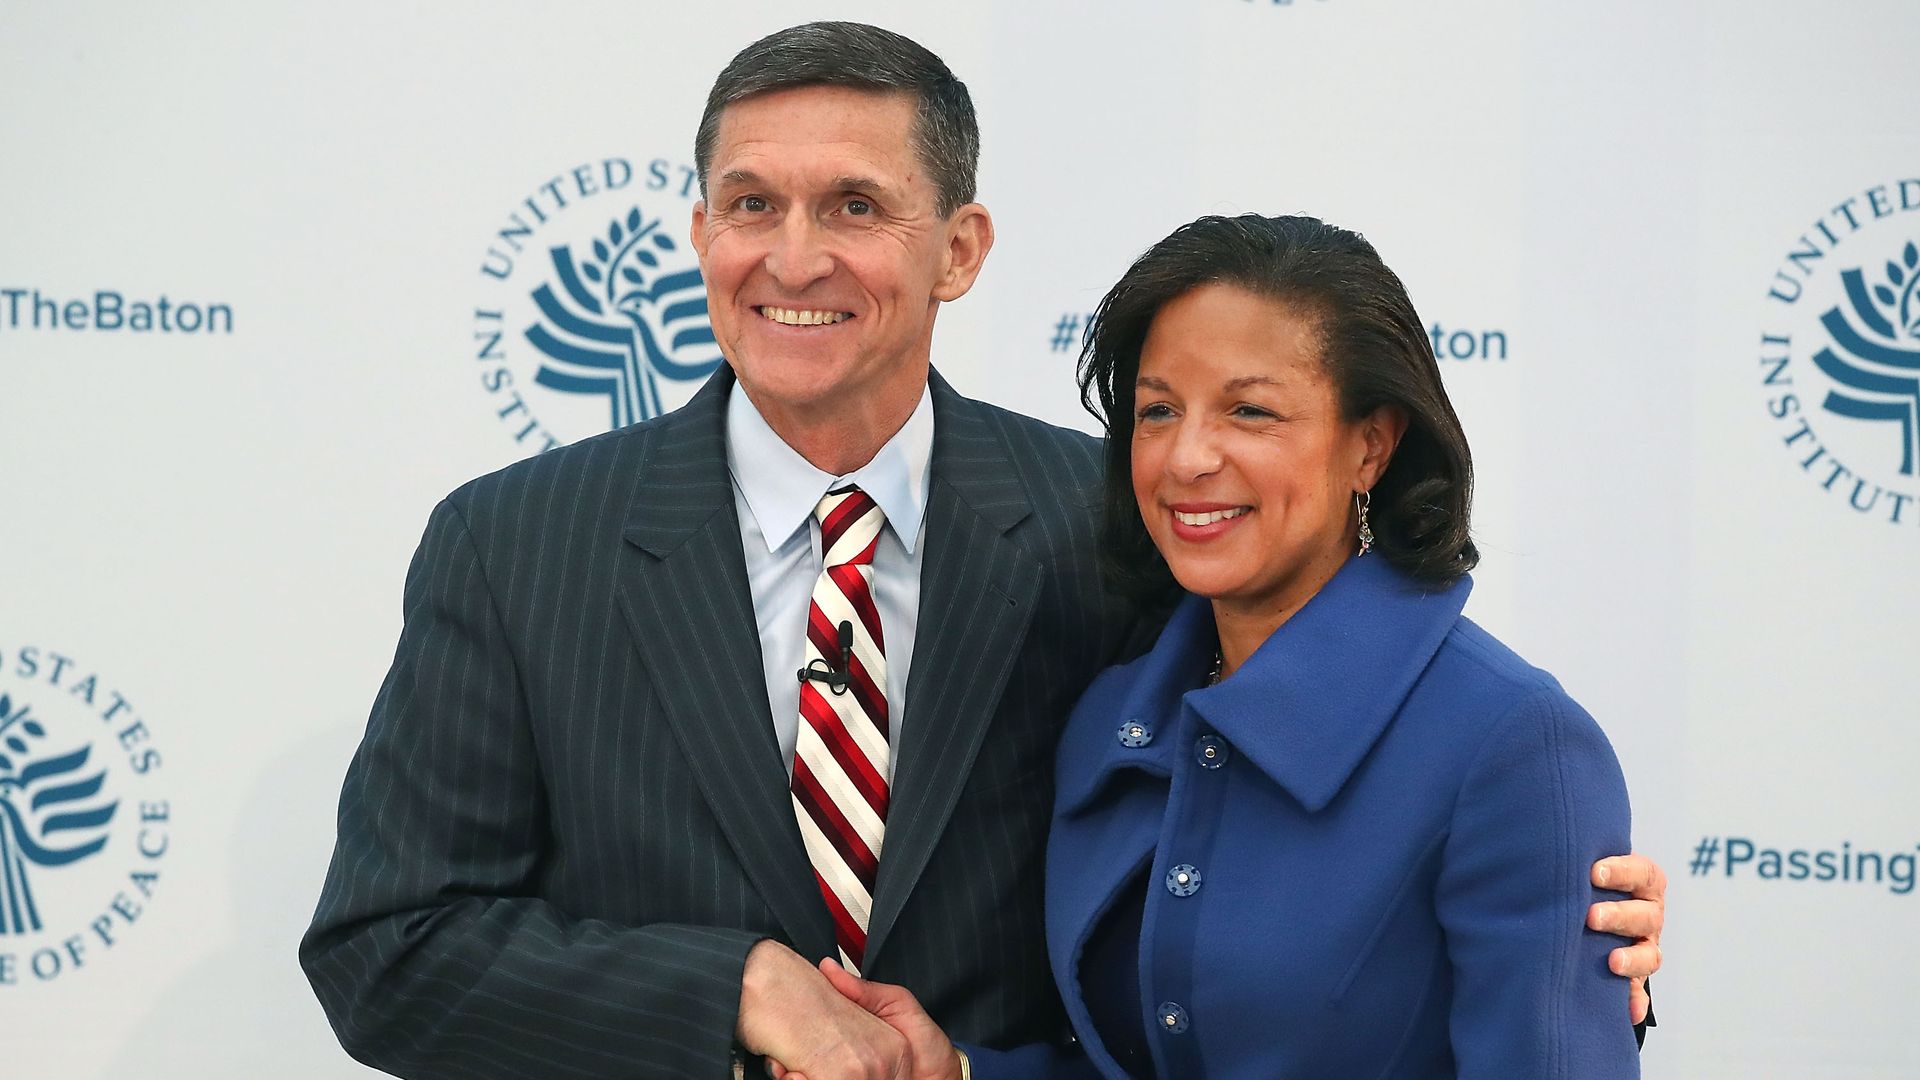 Former National Security Advisor Susan Rice poses with her replacement, Michael Flynn